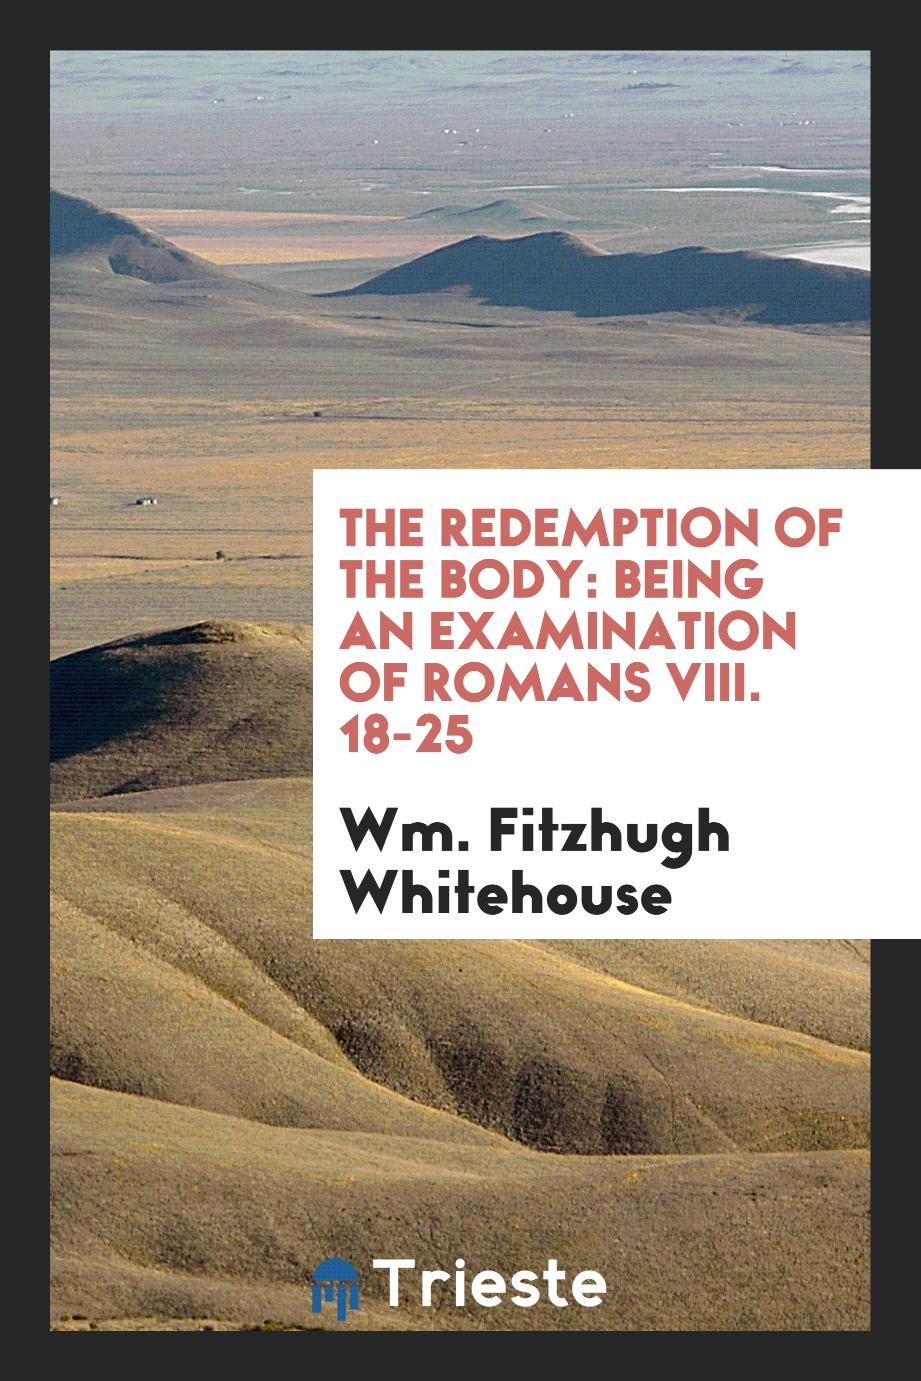 The Redemption of the Body: Being an Examination of Romans VIII. 18-25